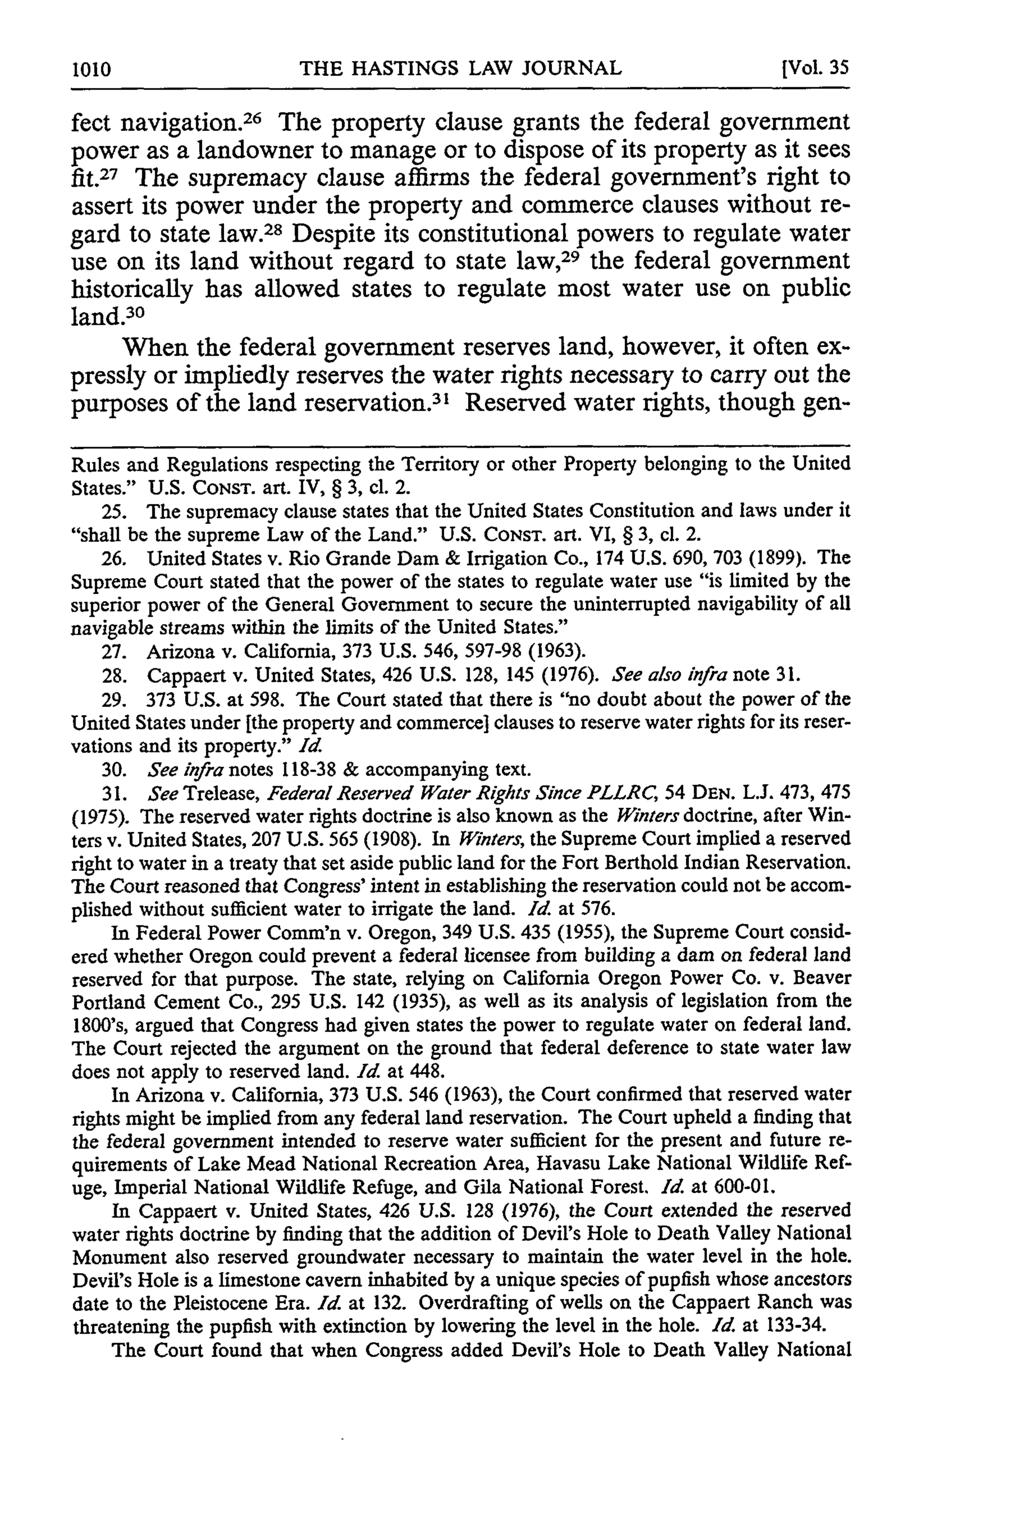 THE HASTINGS LAW JOURNAL [Vol. 35 fect navigation. 26 The property clause grants the federal government power as a landowner to manage or to dispose of its property as it sees fit.